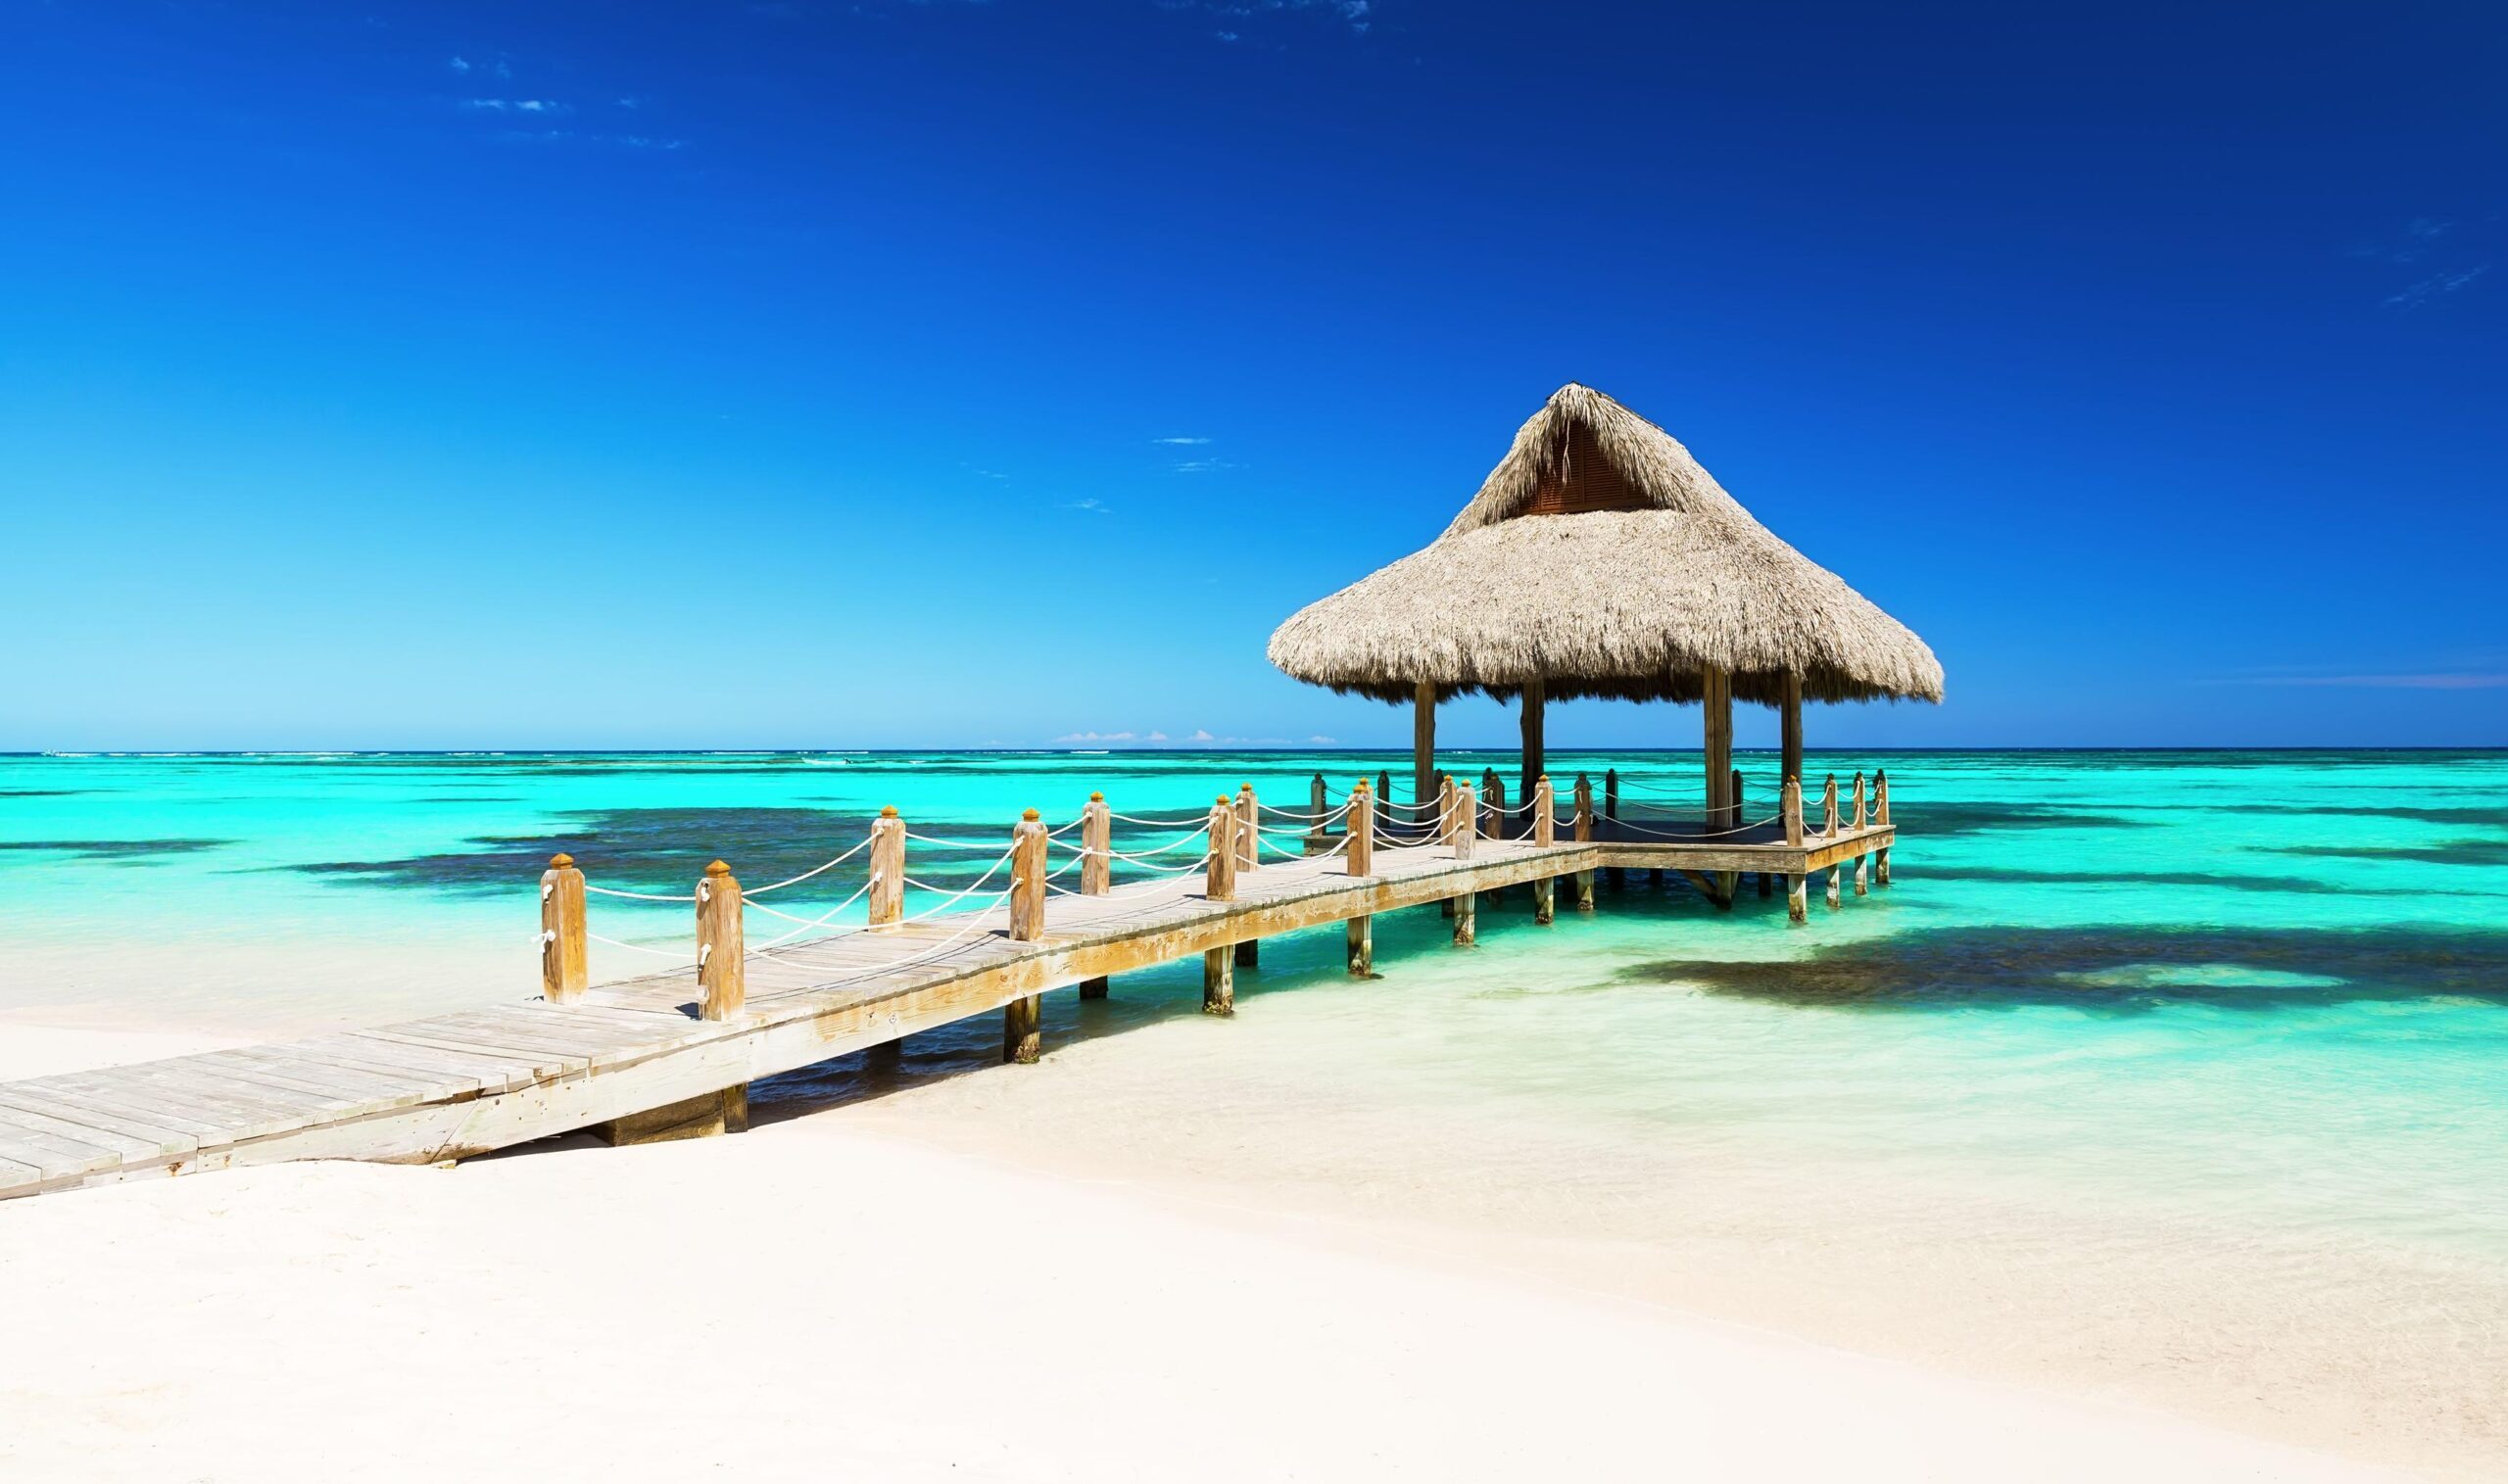 Save 30% off base fares from Toronto to Punta Cana or Montego Bay with promo code!